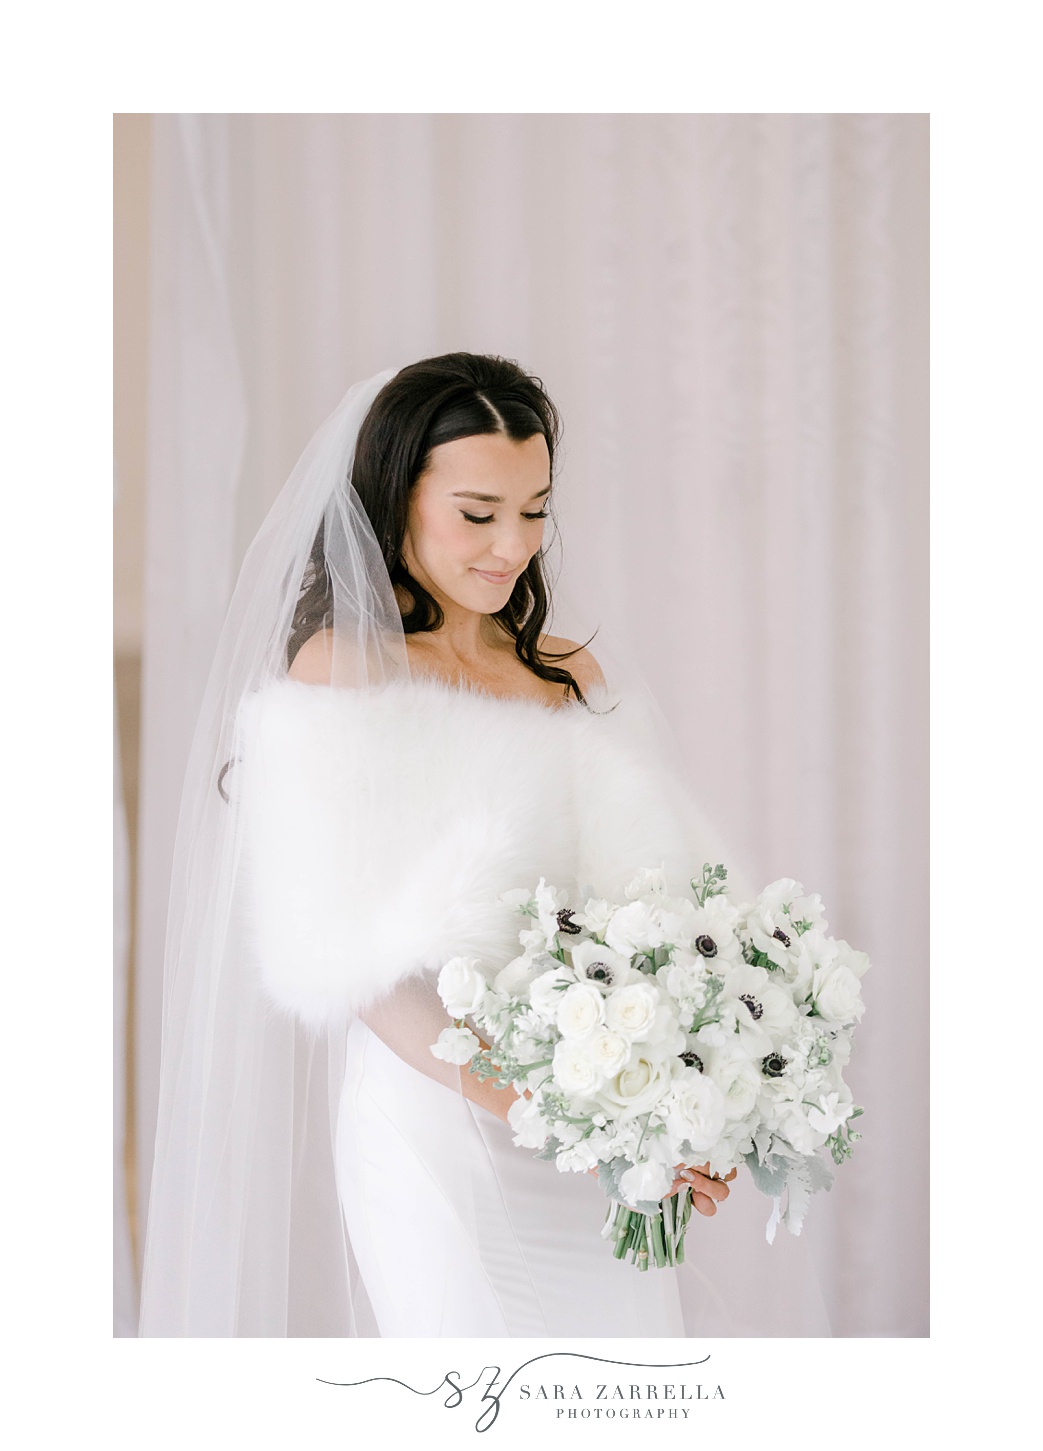 winter bride looks down at bouquet of white anemones with veil around shoulders 